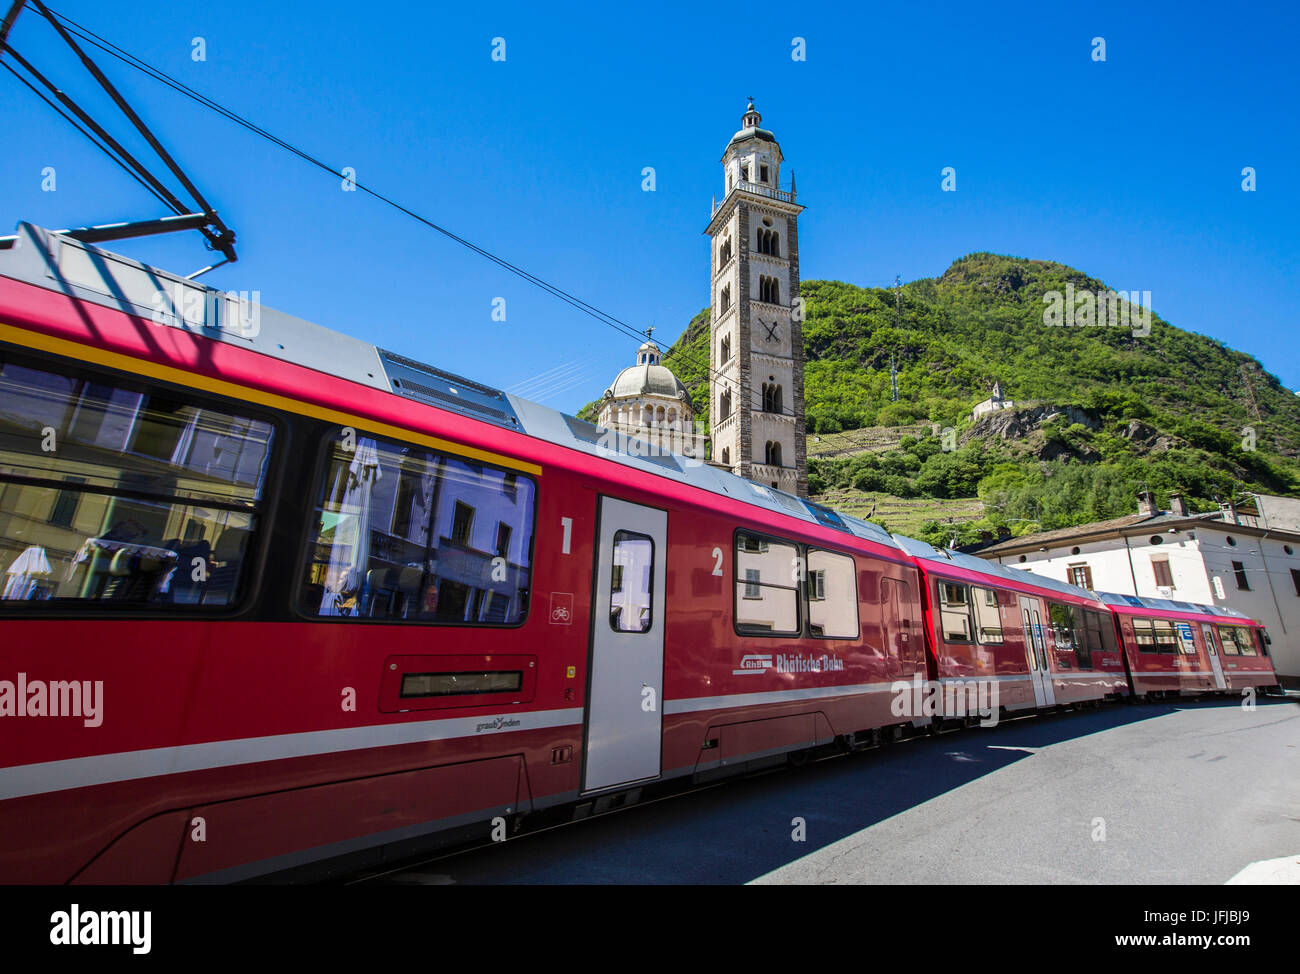 The Red Train Heritage Unesco is the symbol of the Rhaetian Railway starts from Tirano, Valtellina, Lombardy, Italy, Europe Stock Photo